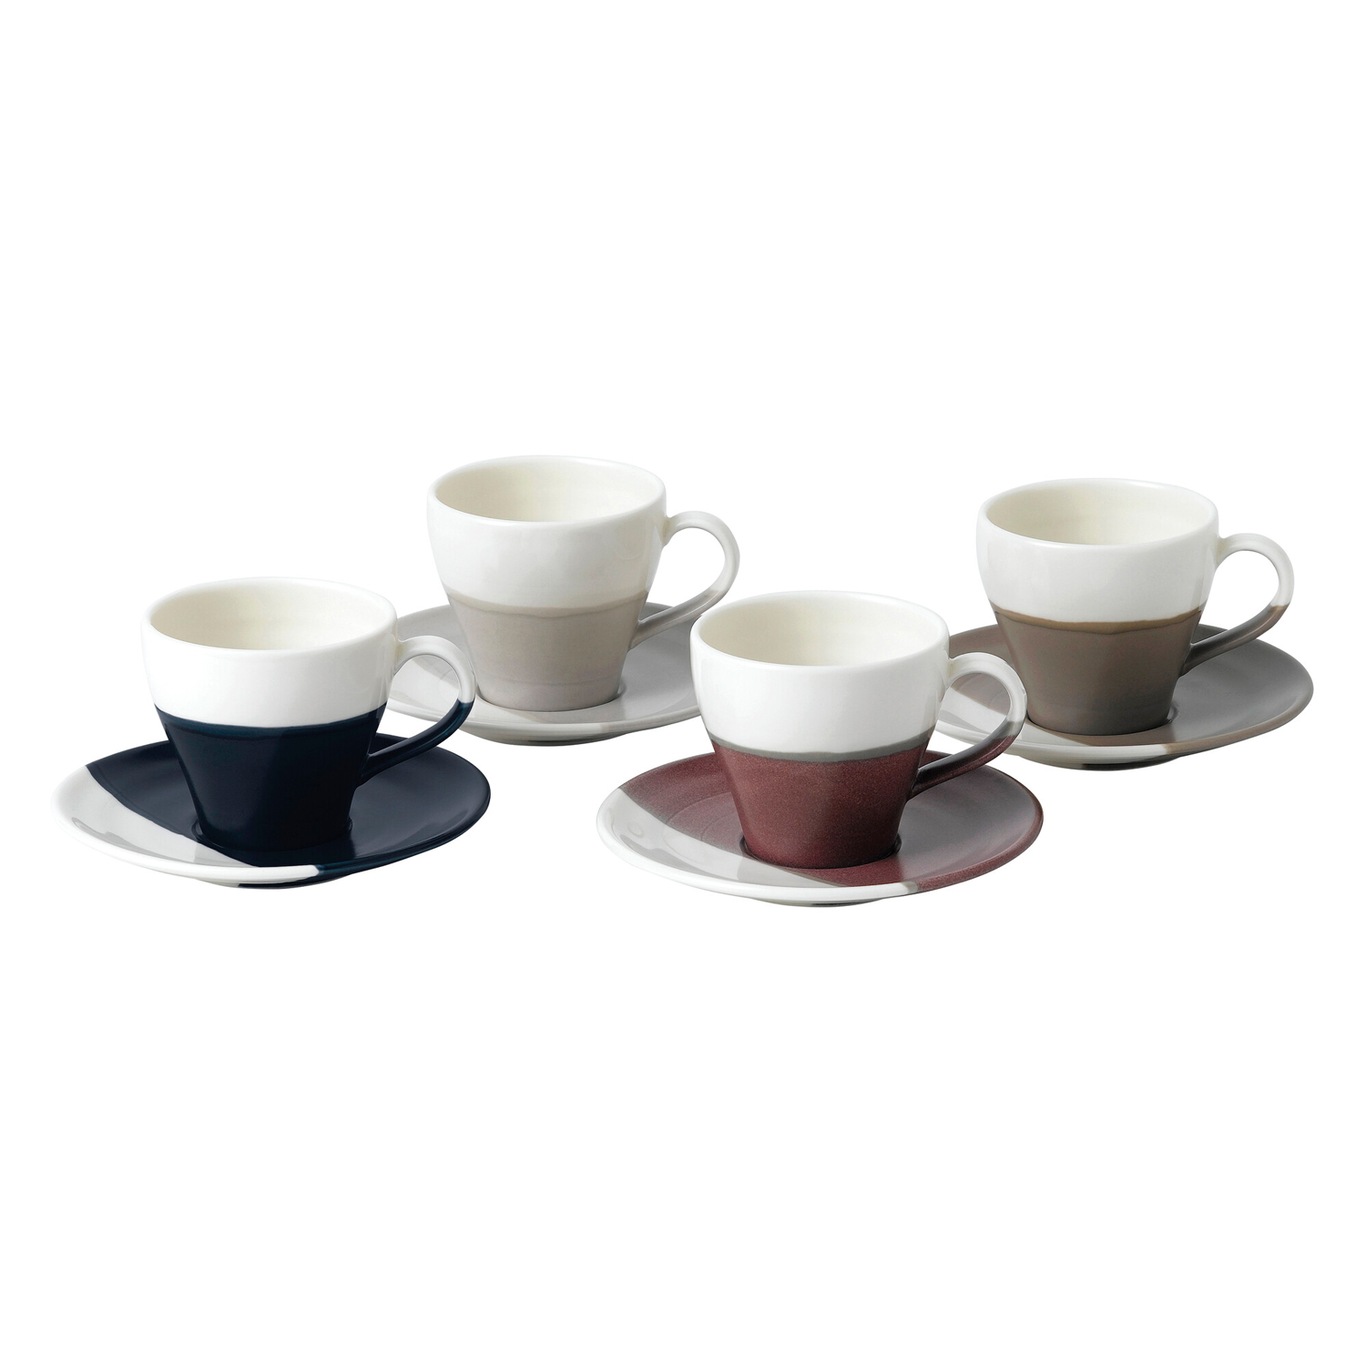 https://royaldesign.com/image/2/royal-doulton-coffee-studio-espresso-cups-and-saucers-4-pack-0?w=800&quality=80